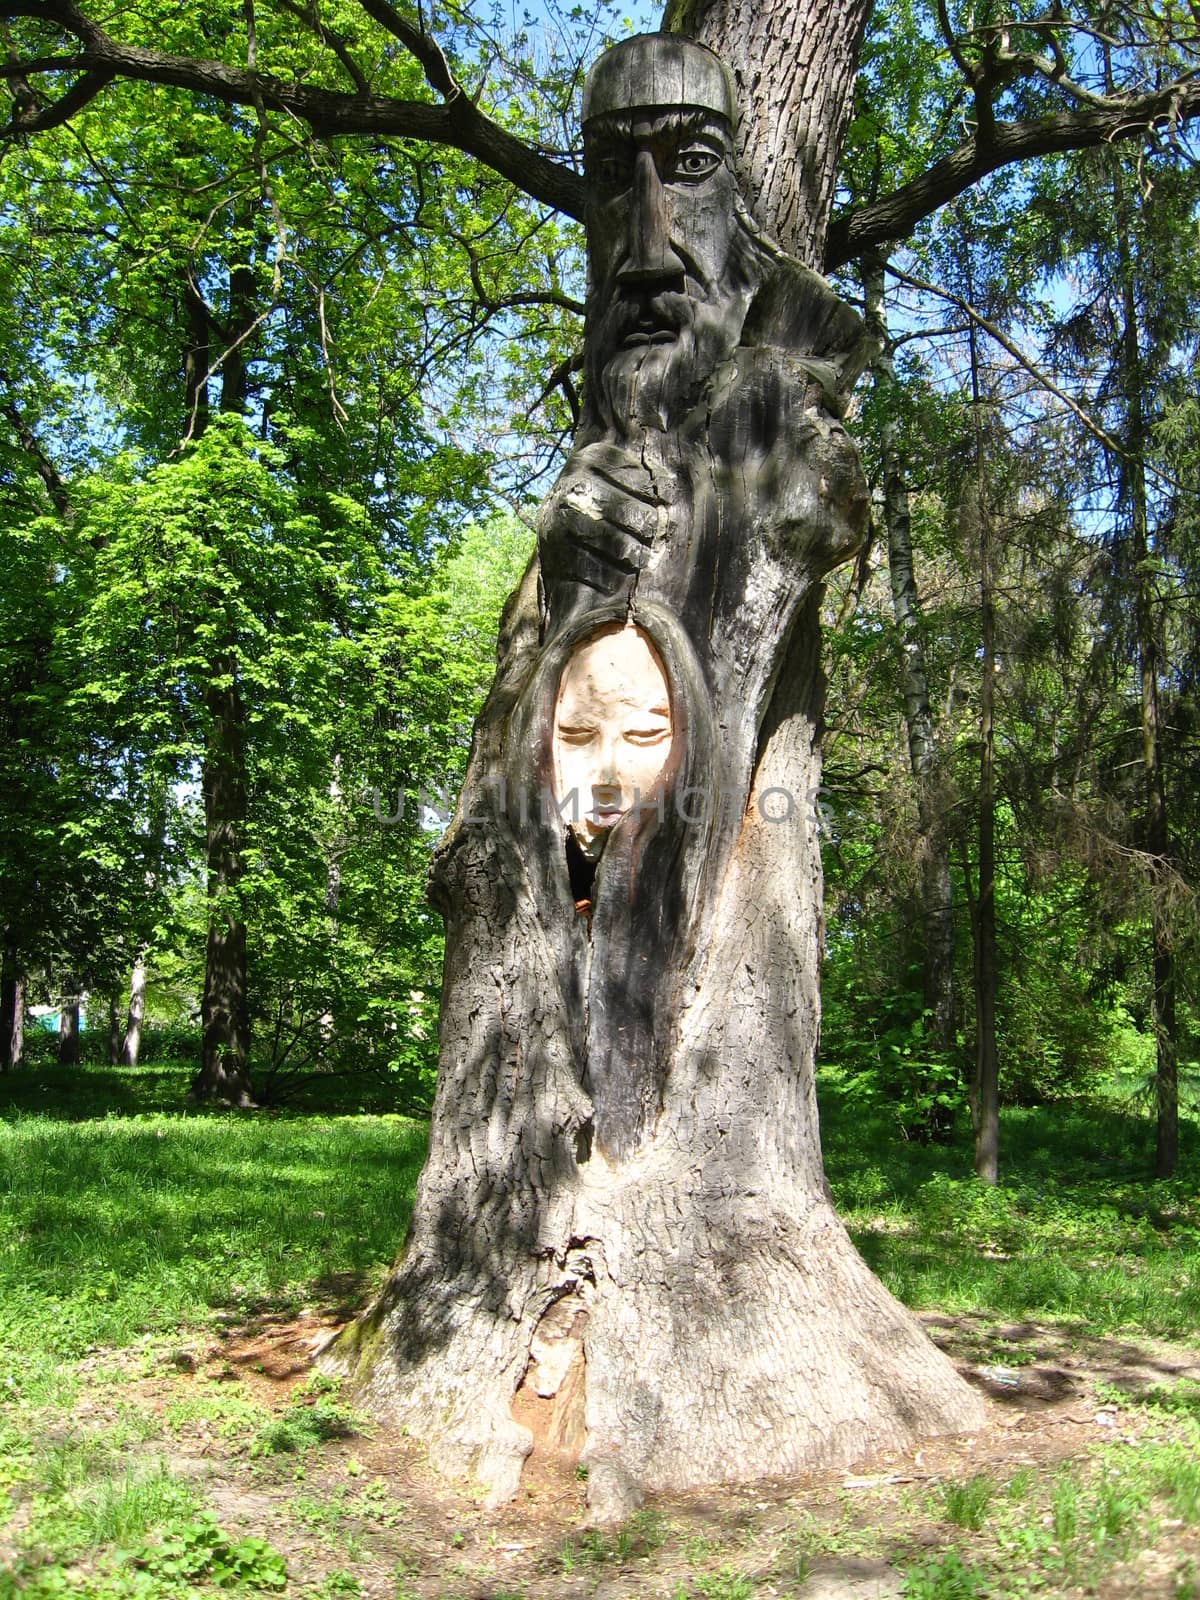 image of huge old oak with a wooden sculpture in it